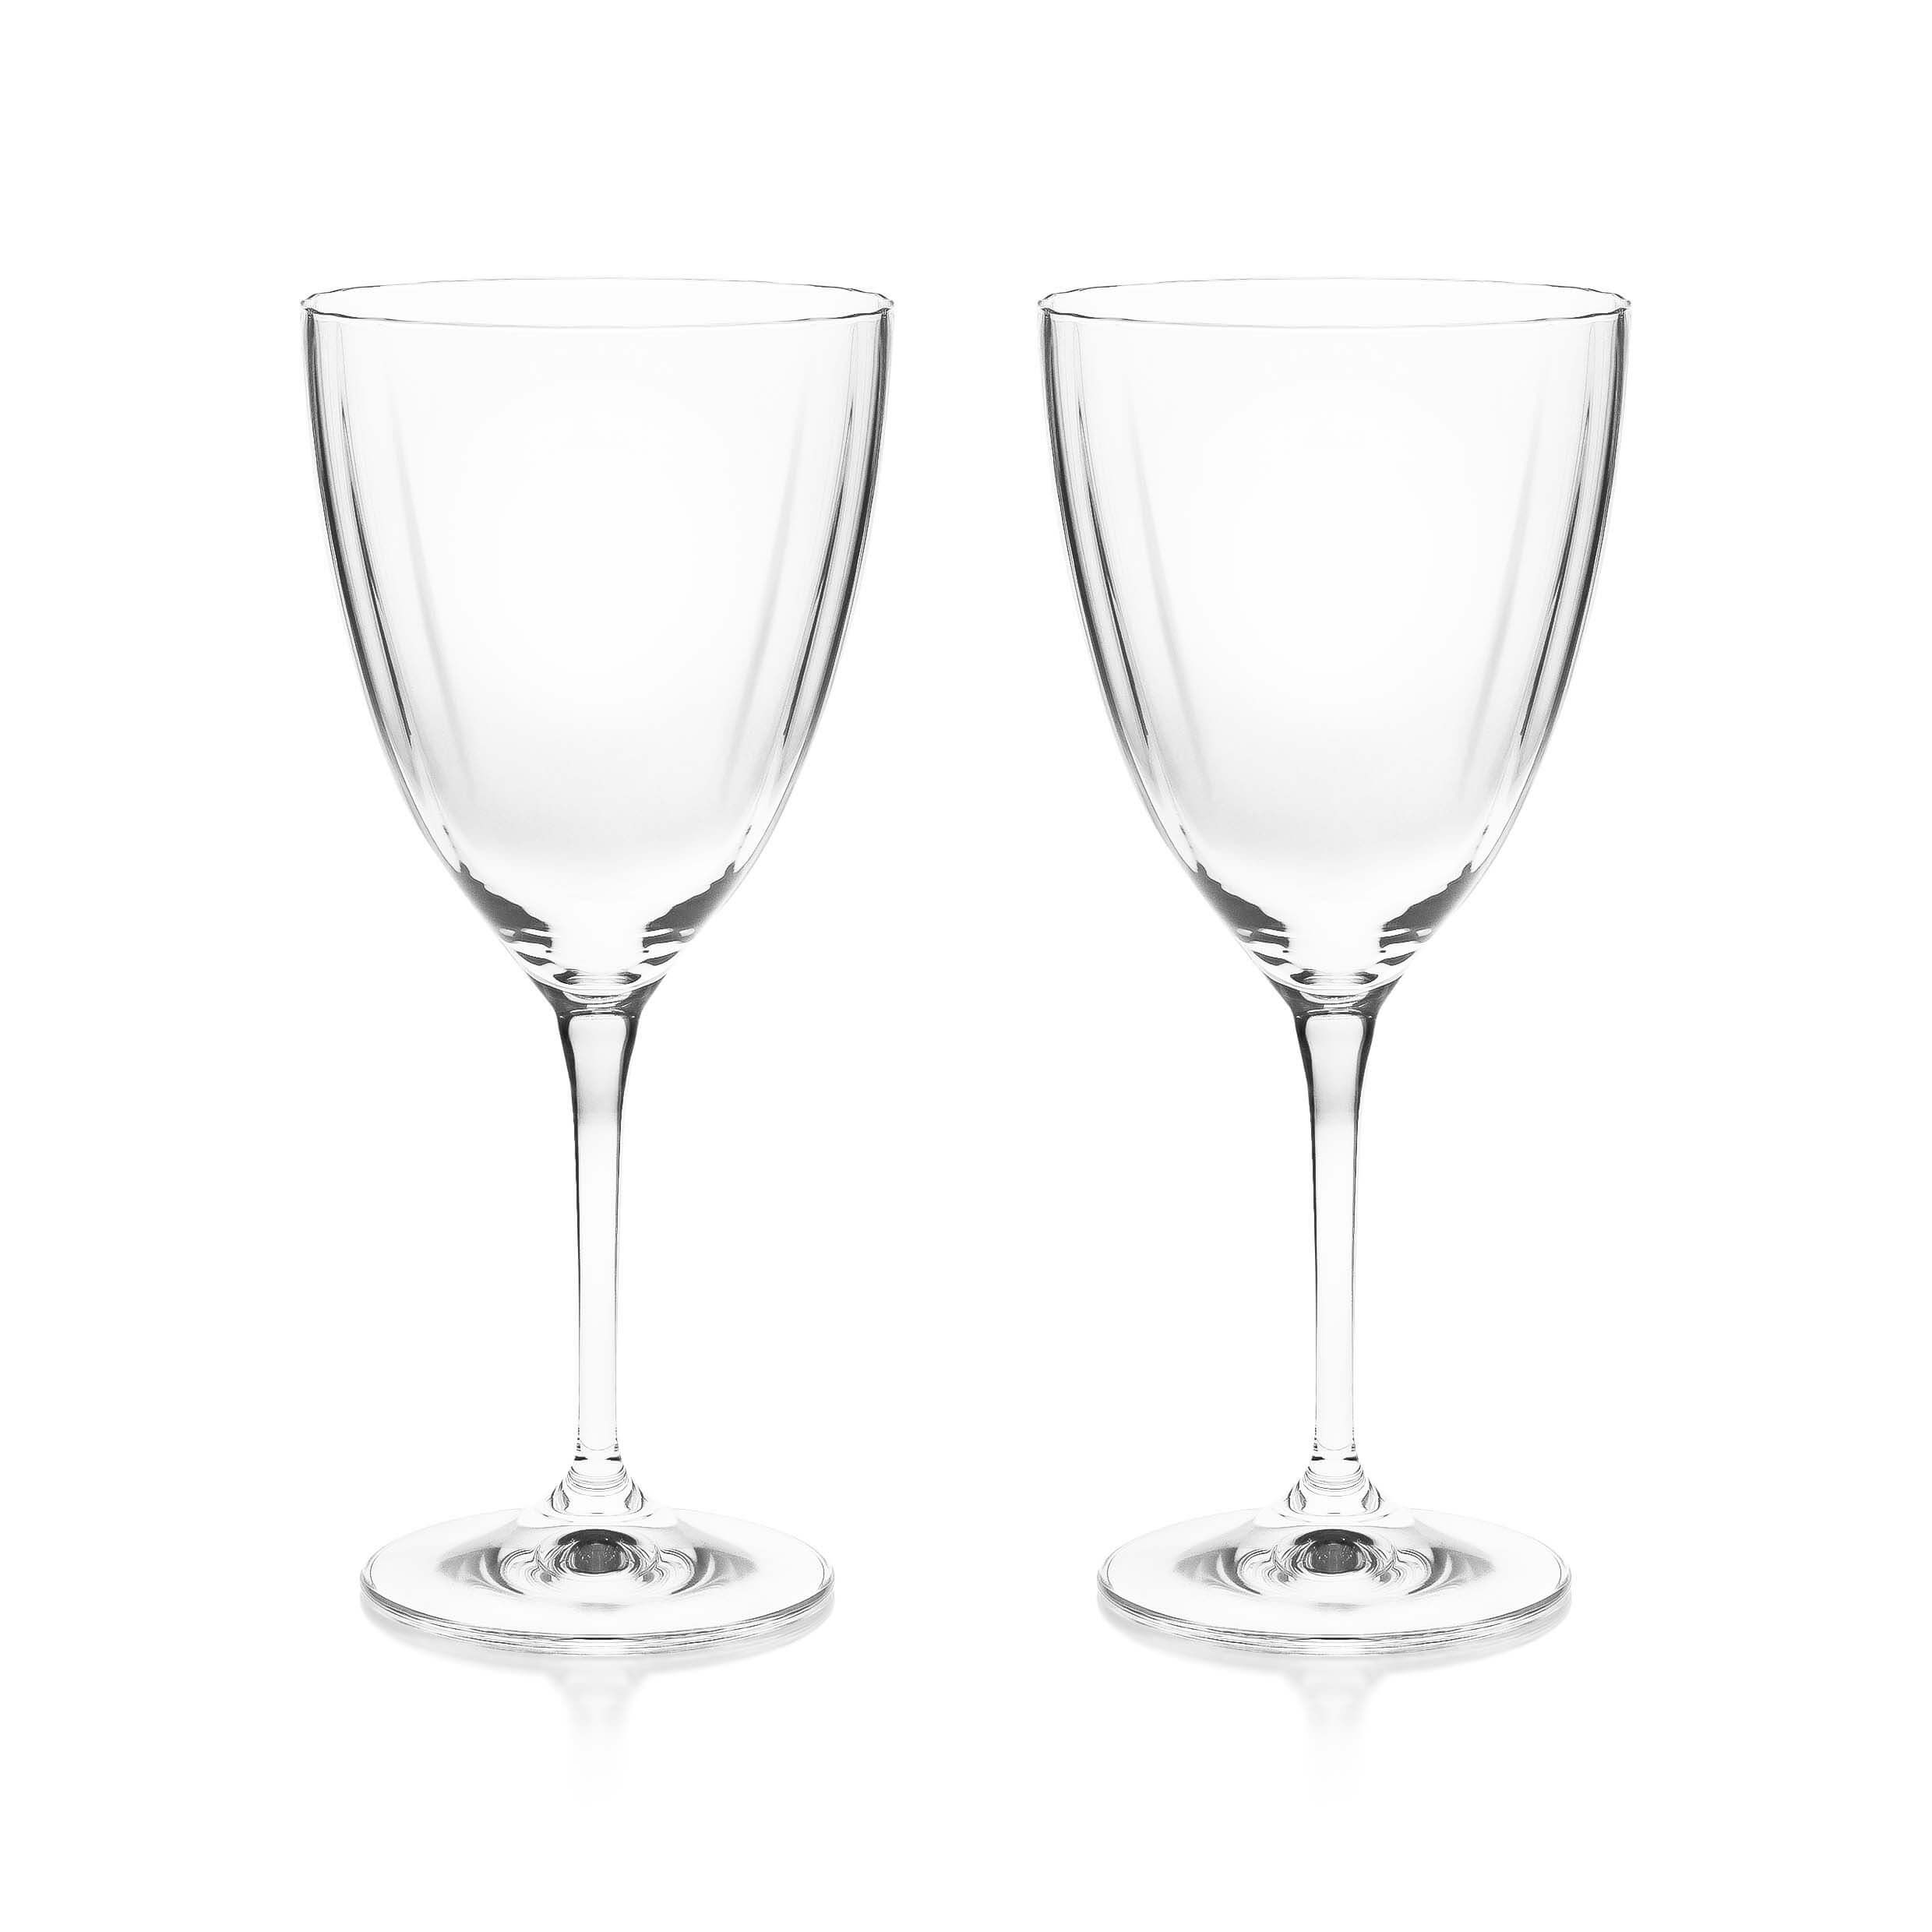 Ripple Set Of 2 Wine Glasses By Tipperary Crystal Pair Of Wine Glasses By Tipperary Crystal